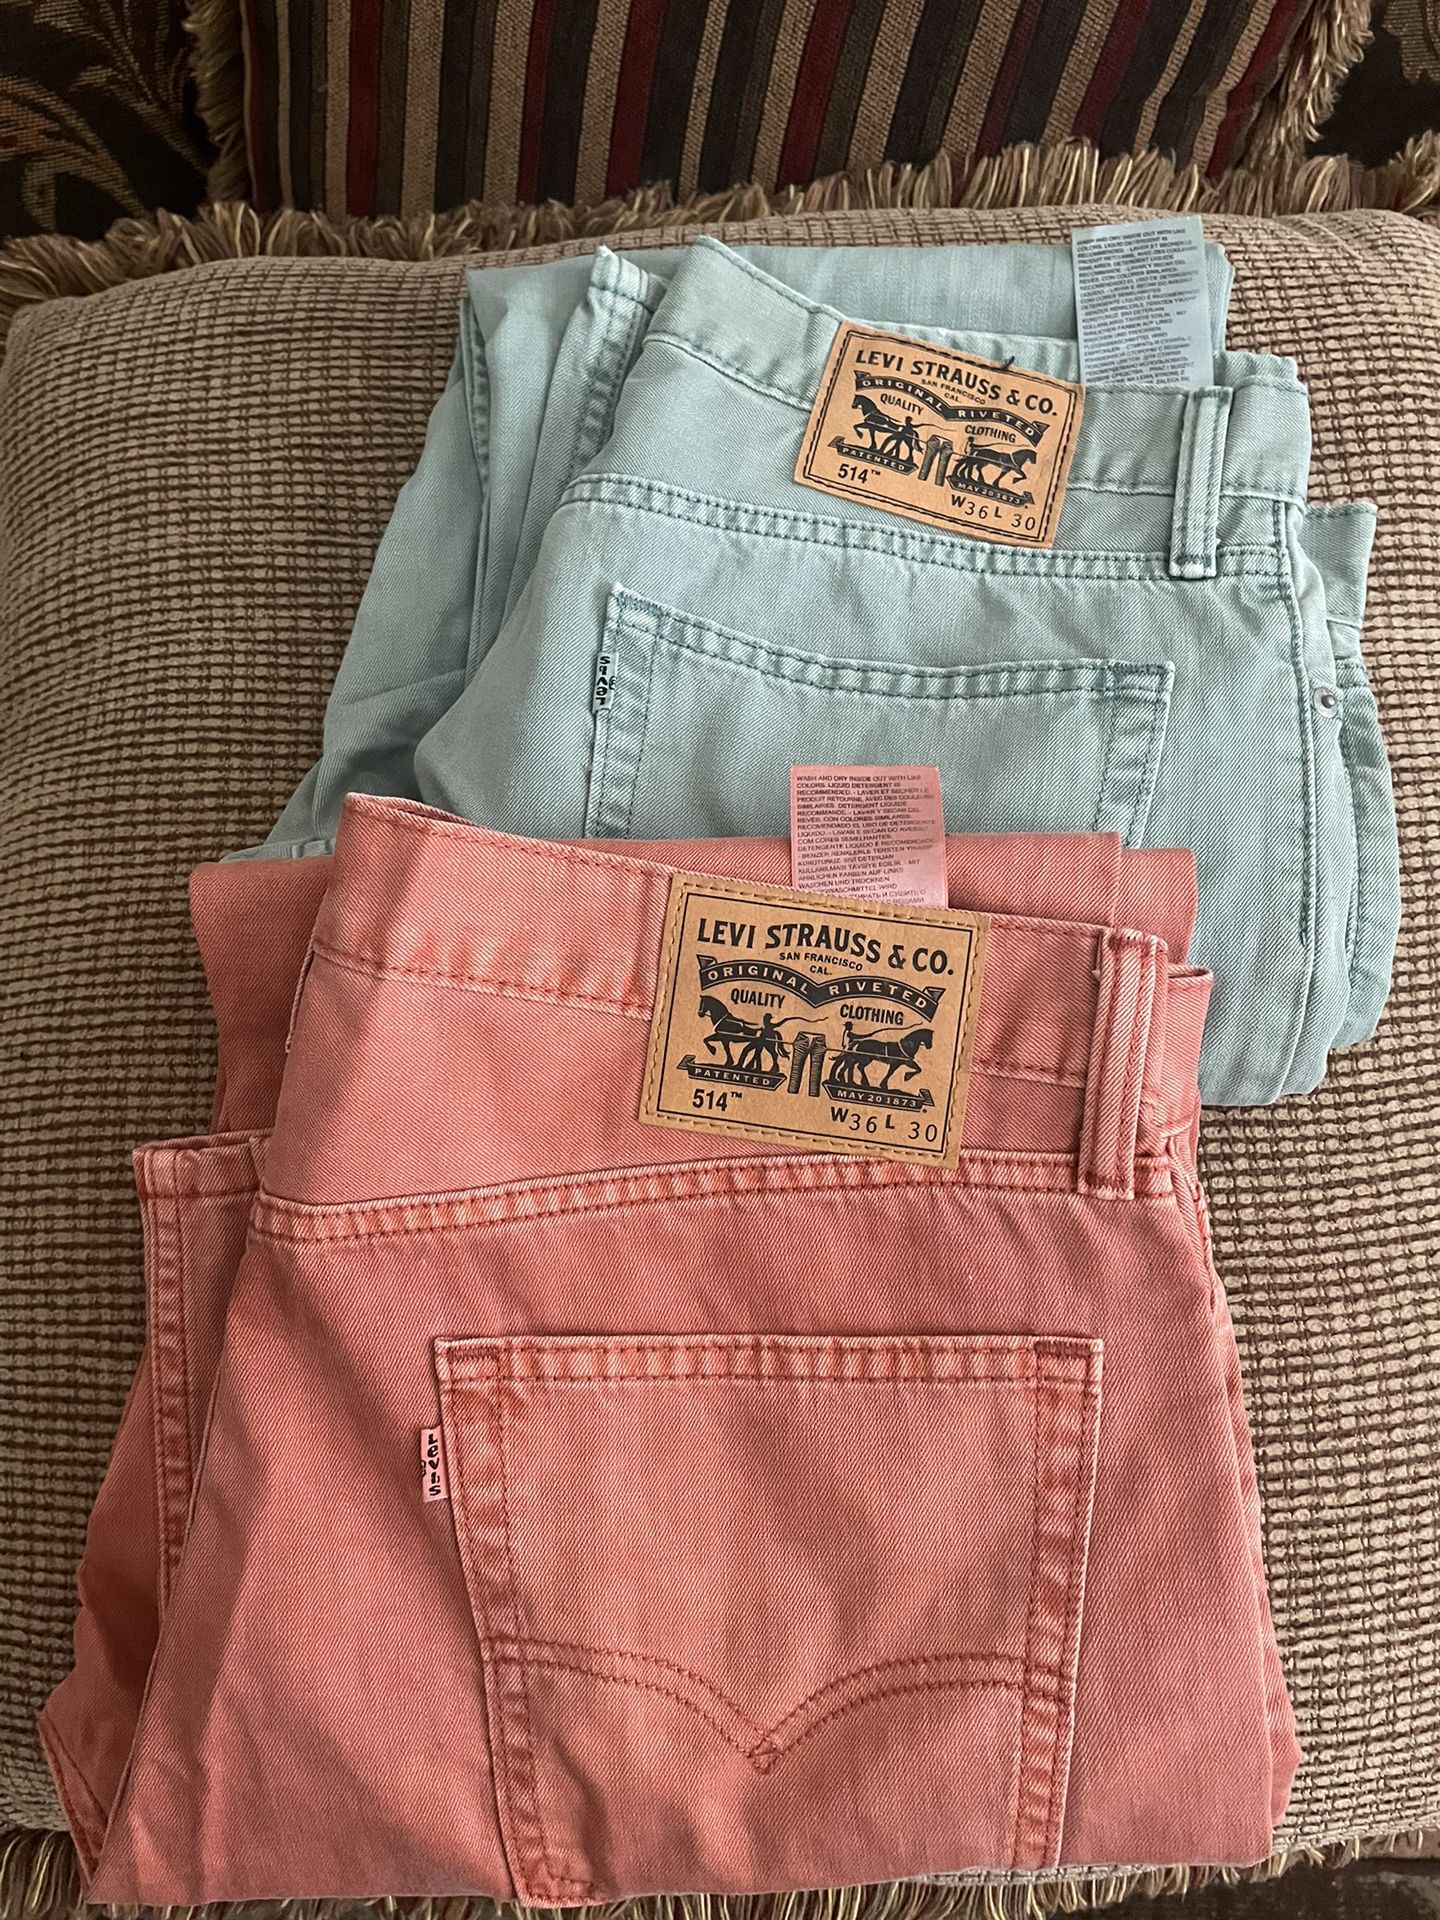 LEVIS SIZE 36W 30L WORN ONCE BASICALLY NEW $50 For Both